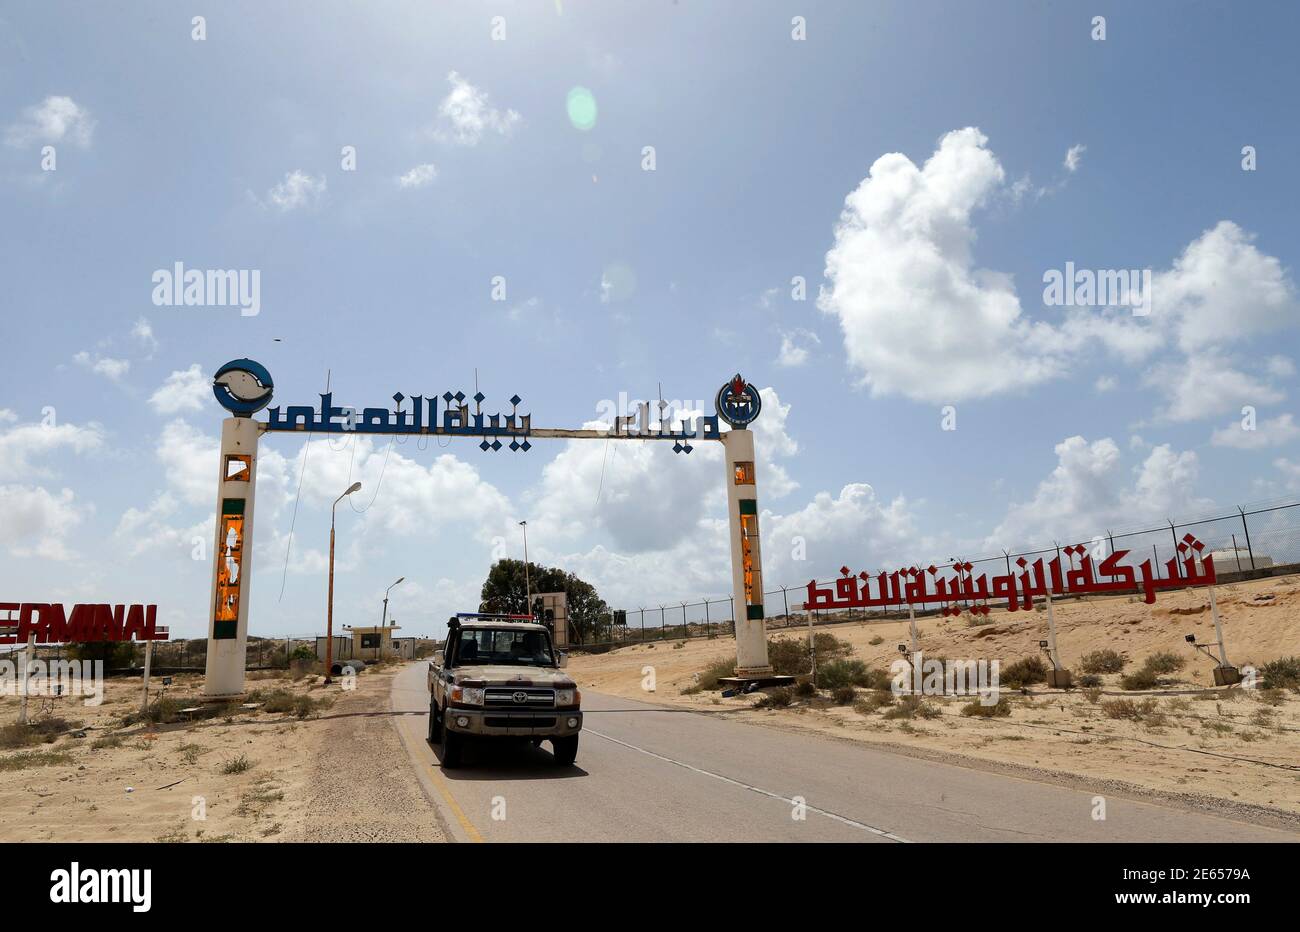 The entrance to the Zueitina oil terminal is seen in Zueitina, west of Benghazi April 7, 2014. Libya's Zueitina oil port prepared on Monday to load crude on tankers after the government reached a deal with rebels to reopen four terminals that insurgents have occupied since summer. The federalist rebels agreed on Sunday to end gradually their eight-month blockade of Zueitina, Hariga, Ras Lanuf and Es Sider ports, which account for around 700,000 barrels per day of the OPEC country's crude exports. REUTERS/Esam Omran Al-Fetori (LIBYA  - Tags: POLITICS ENERGY BUSINESS) Stock Photo